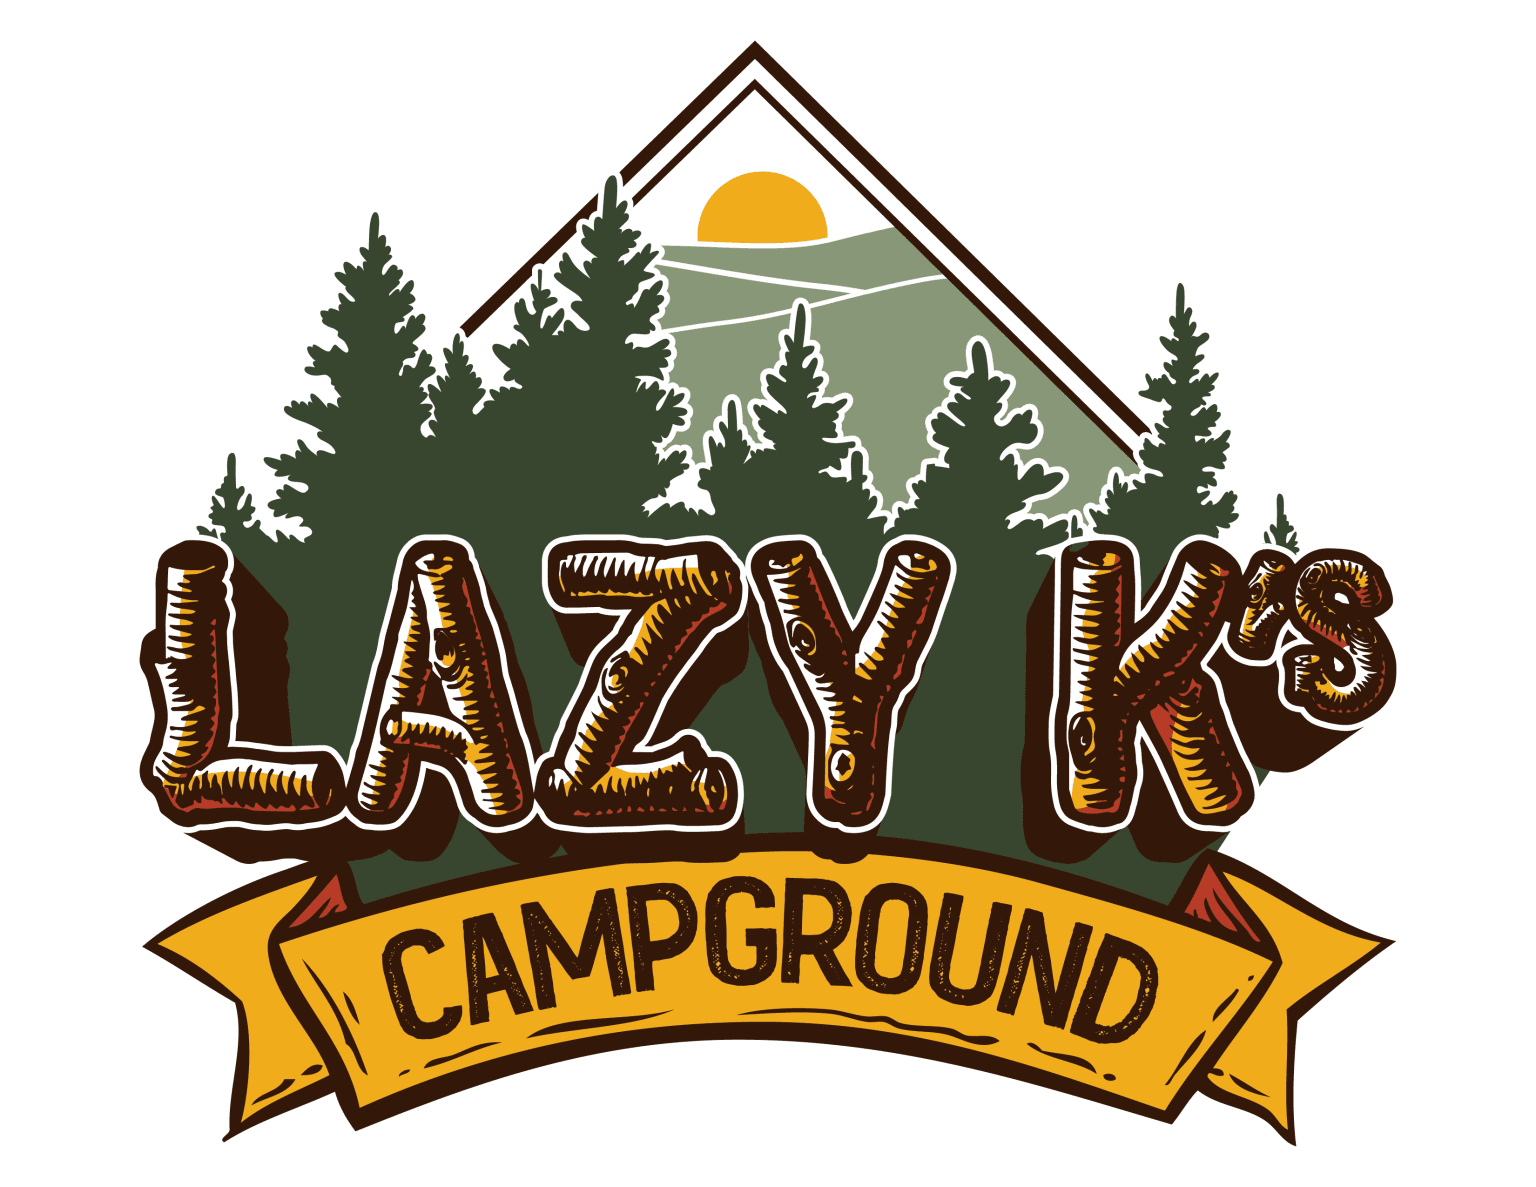 Lazy Ks Campground – Powered by Jag Journey, LLC